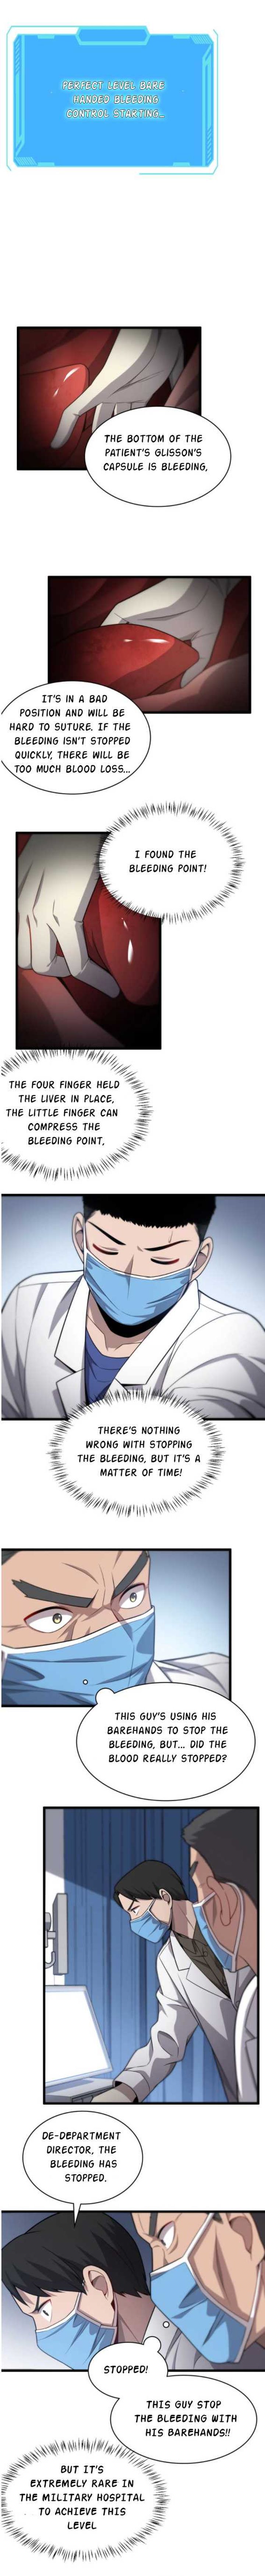 great_doctor_ling_ran_12_8